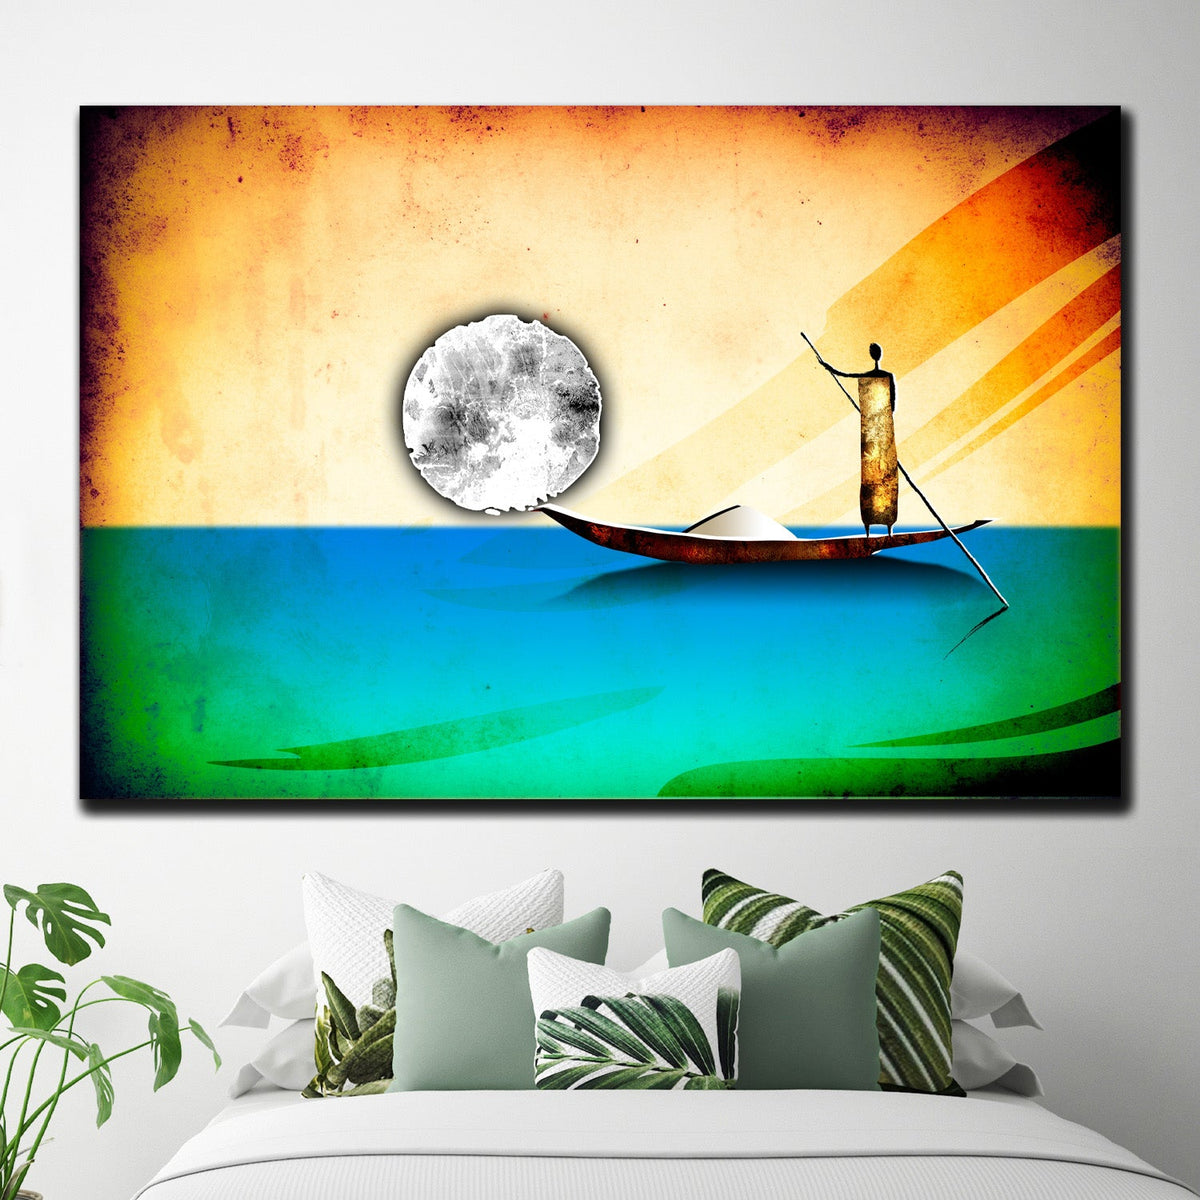 https://cdn.shopify.com/s/files/1/0387/9986/8044/products/TheBoatmanCanvasArtprintStretched-1.jpg